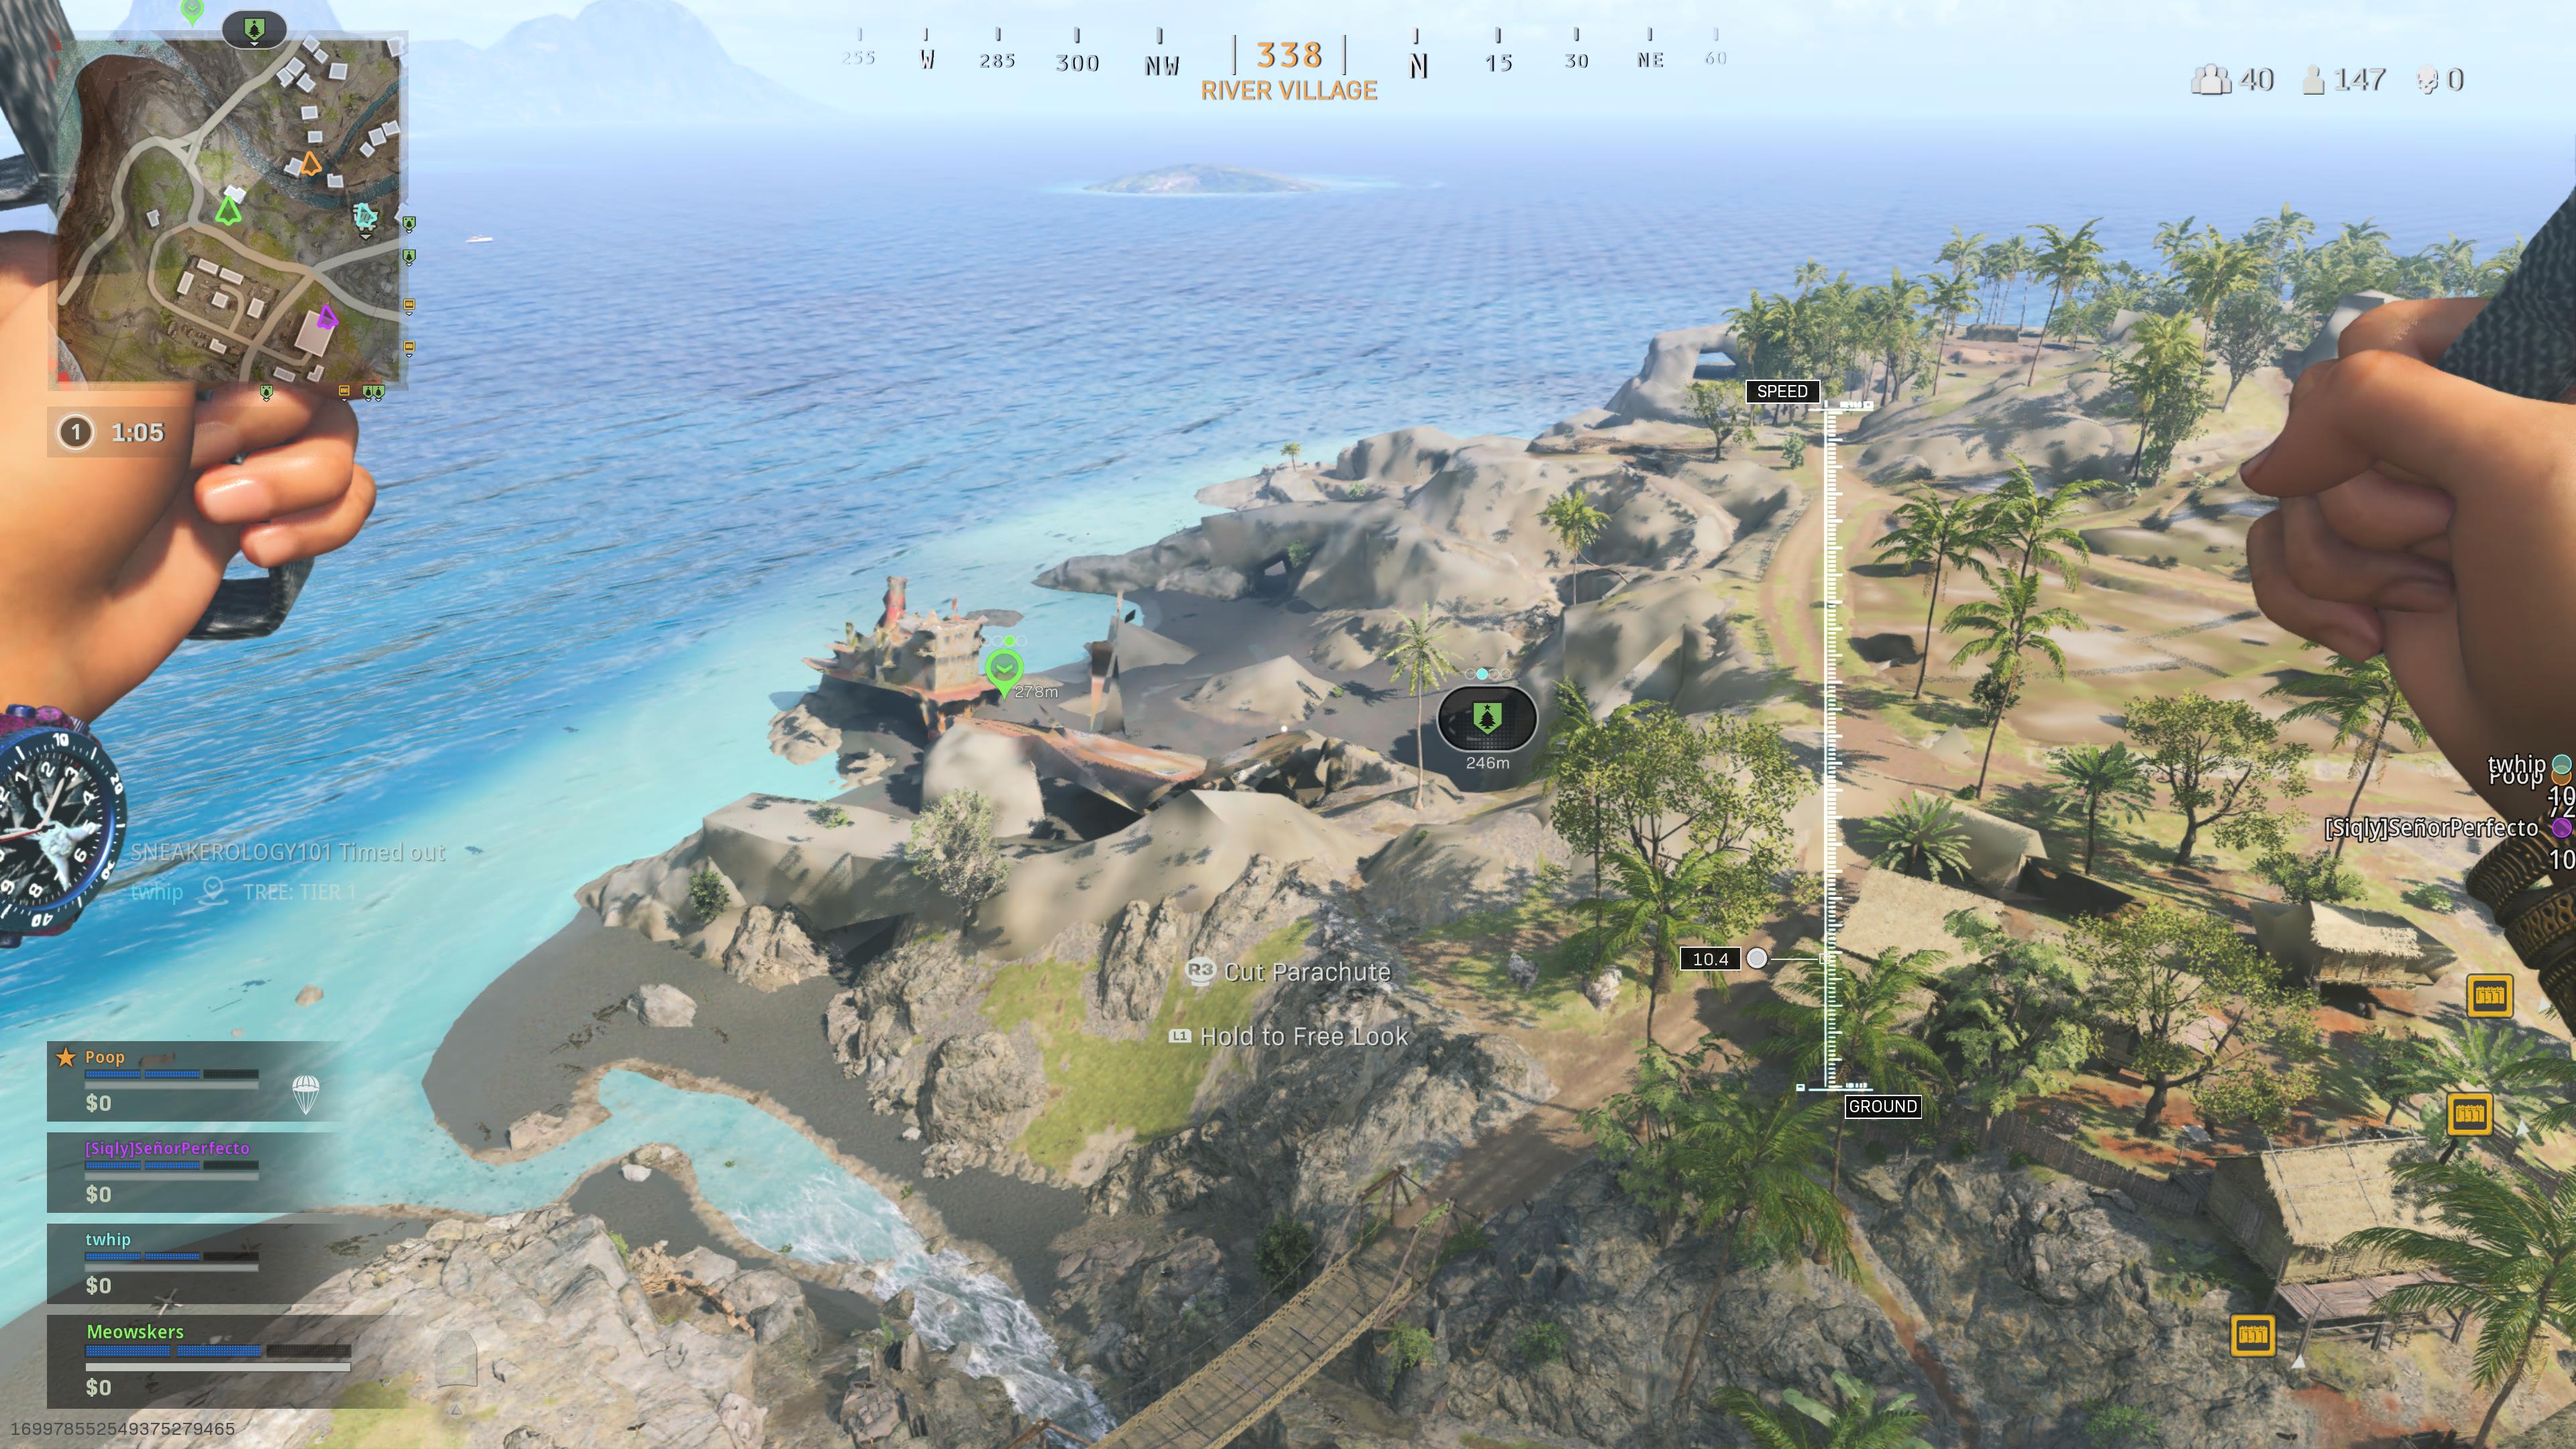 Call of Duty Warzone Rebirth Island guide: the best places to drop and loot